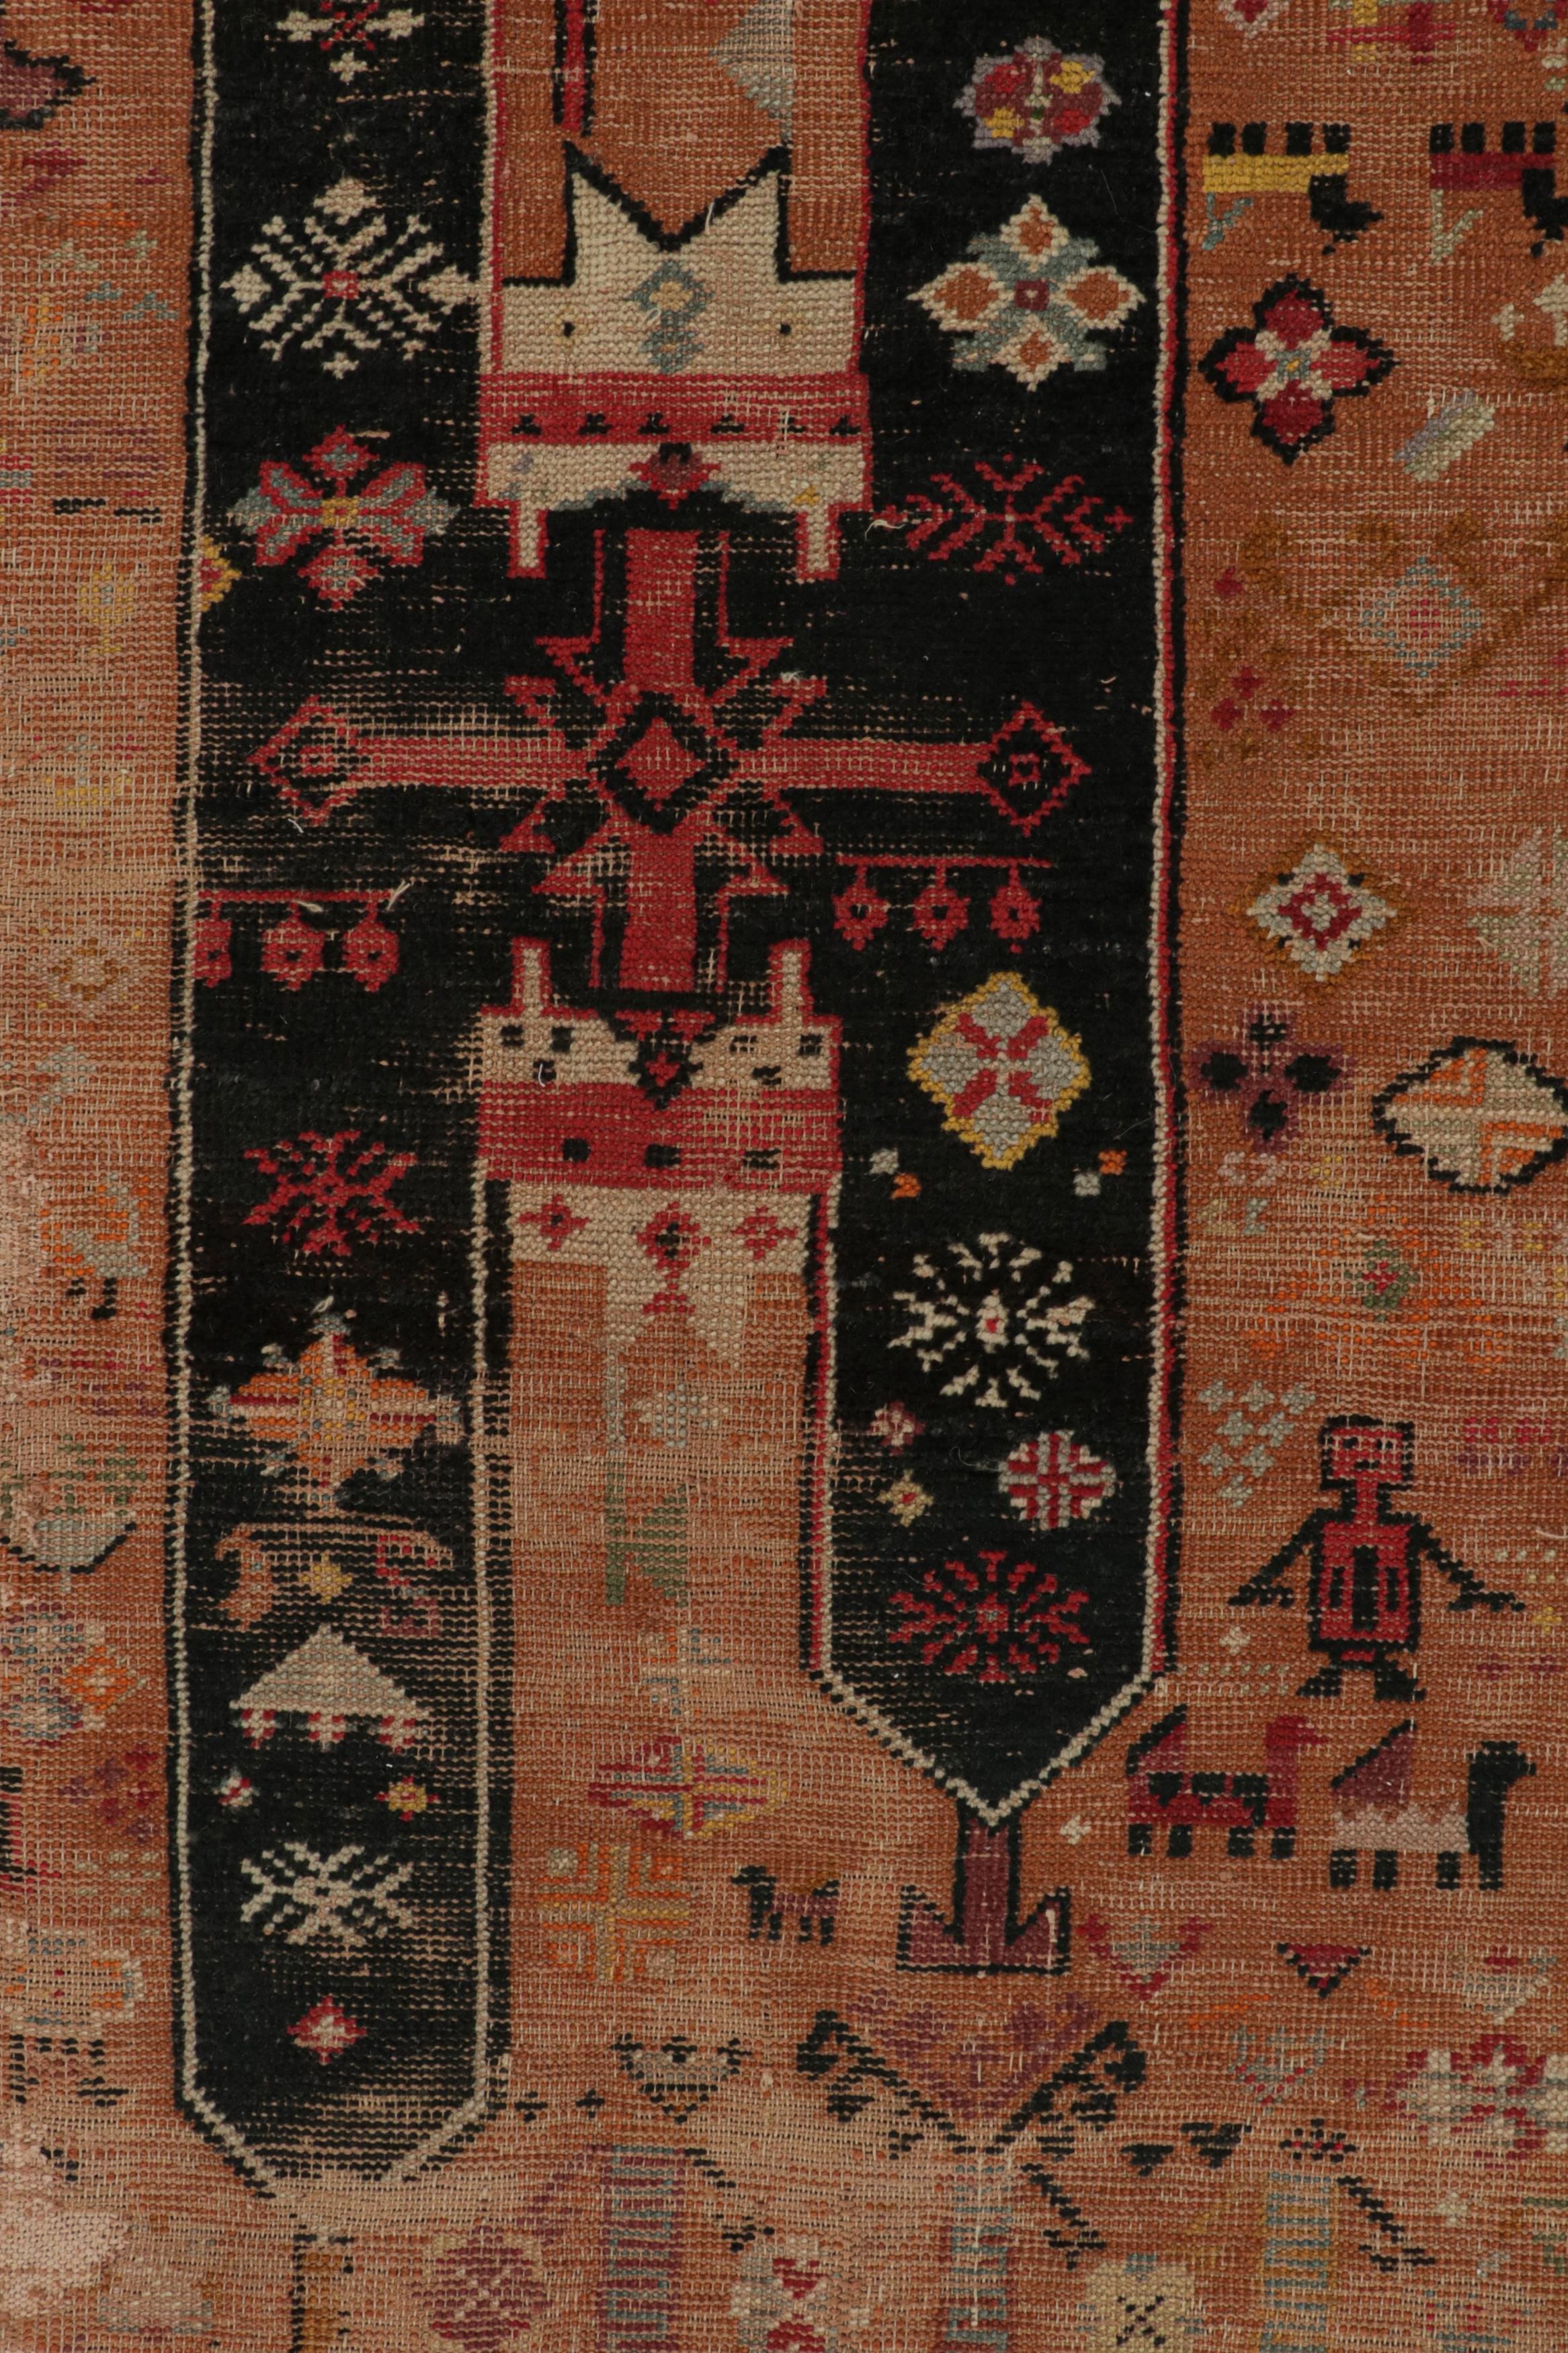 Wool 1890s Antique European Rug with Colorful Geometric Patterns, from Rug & Kilim For Sale